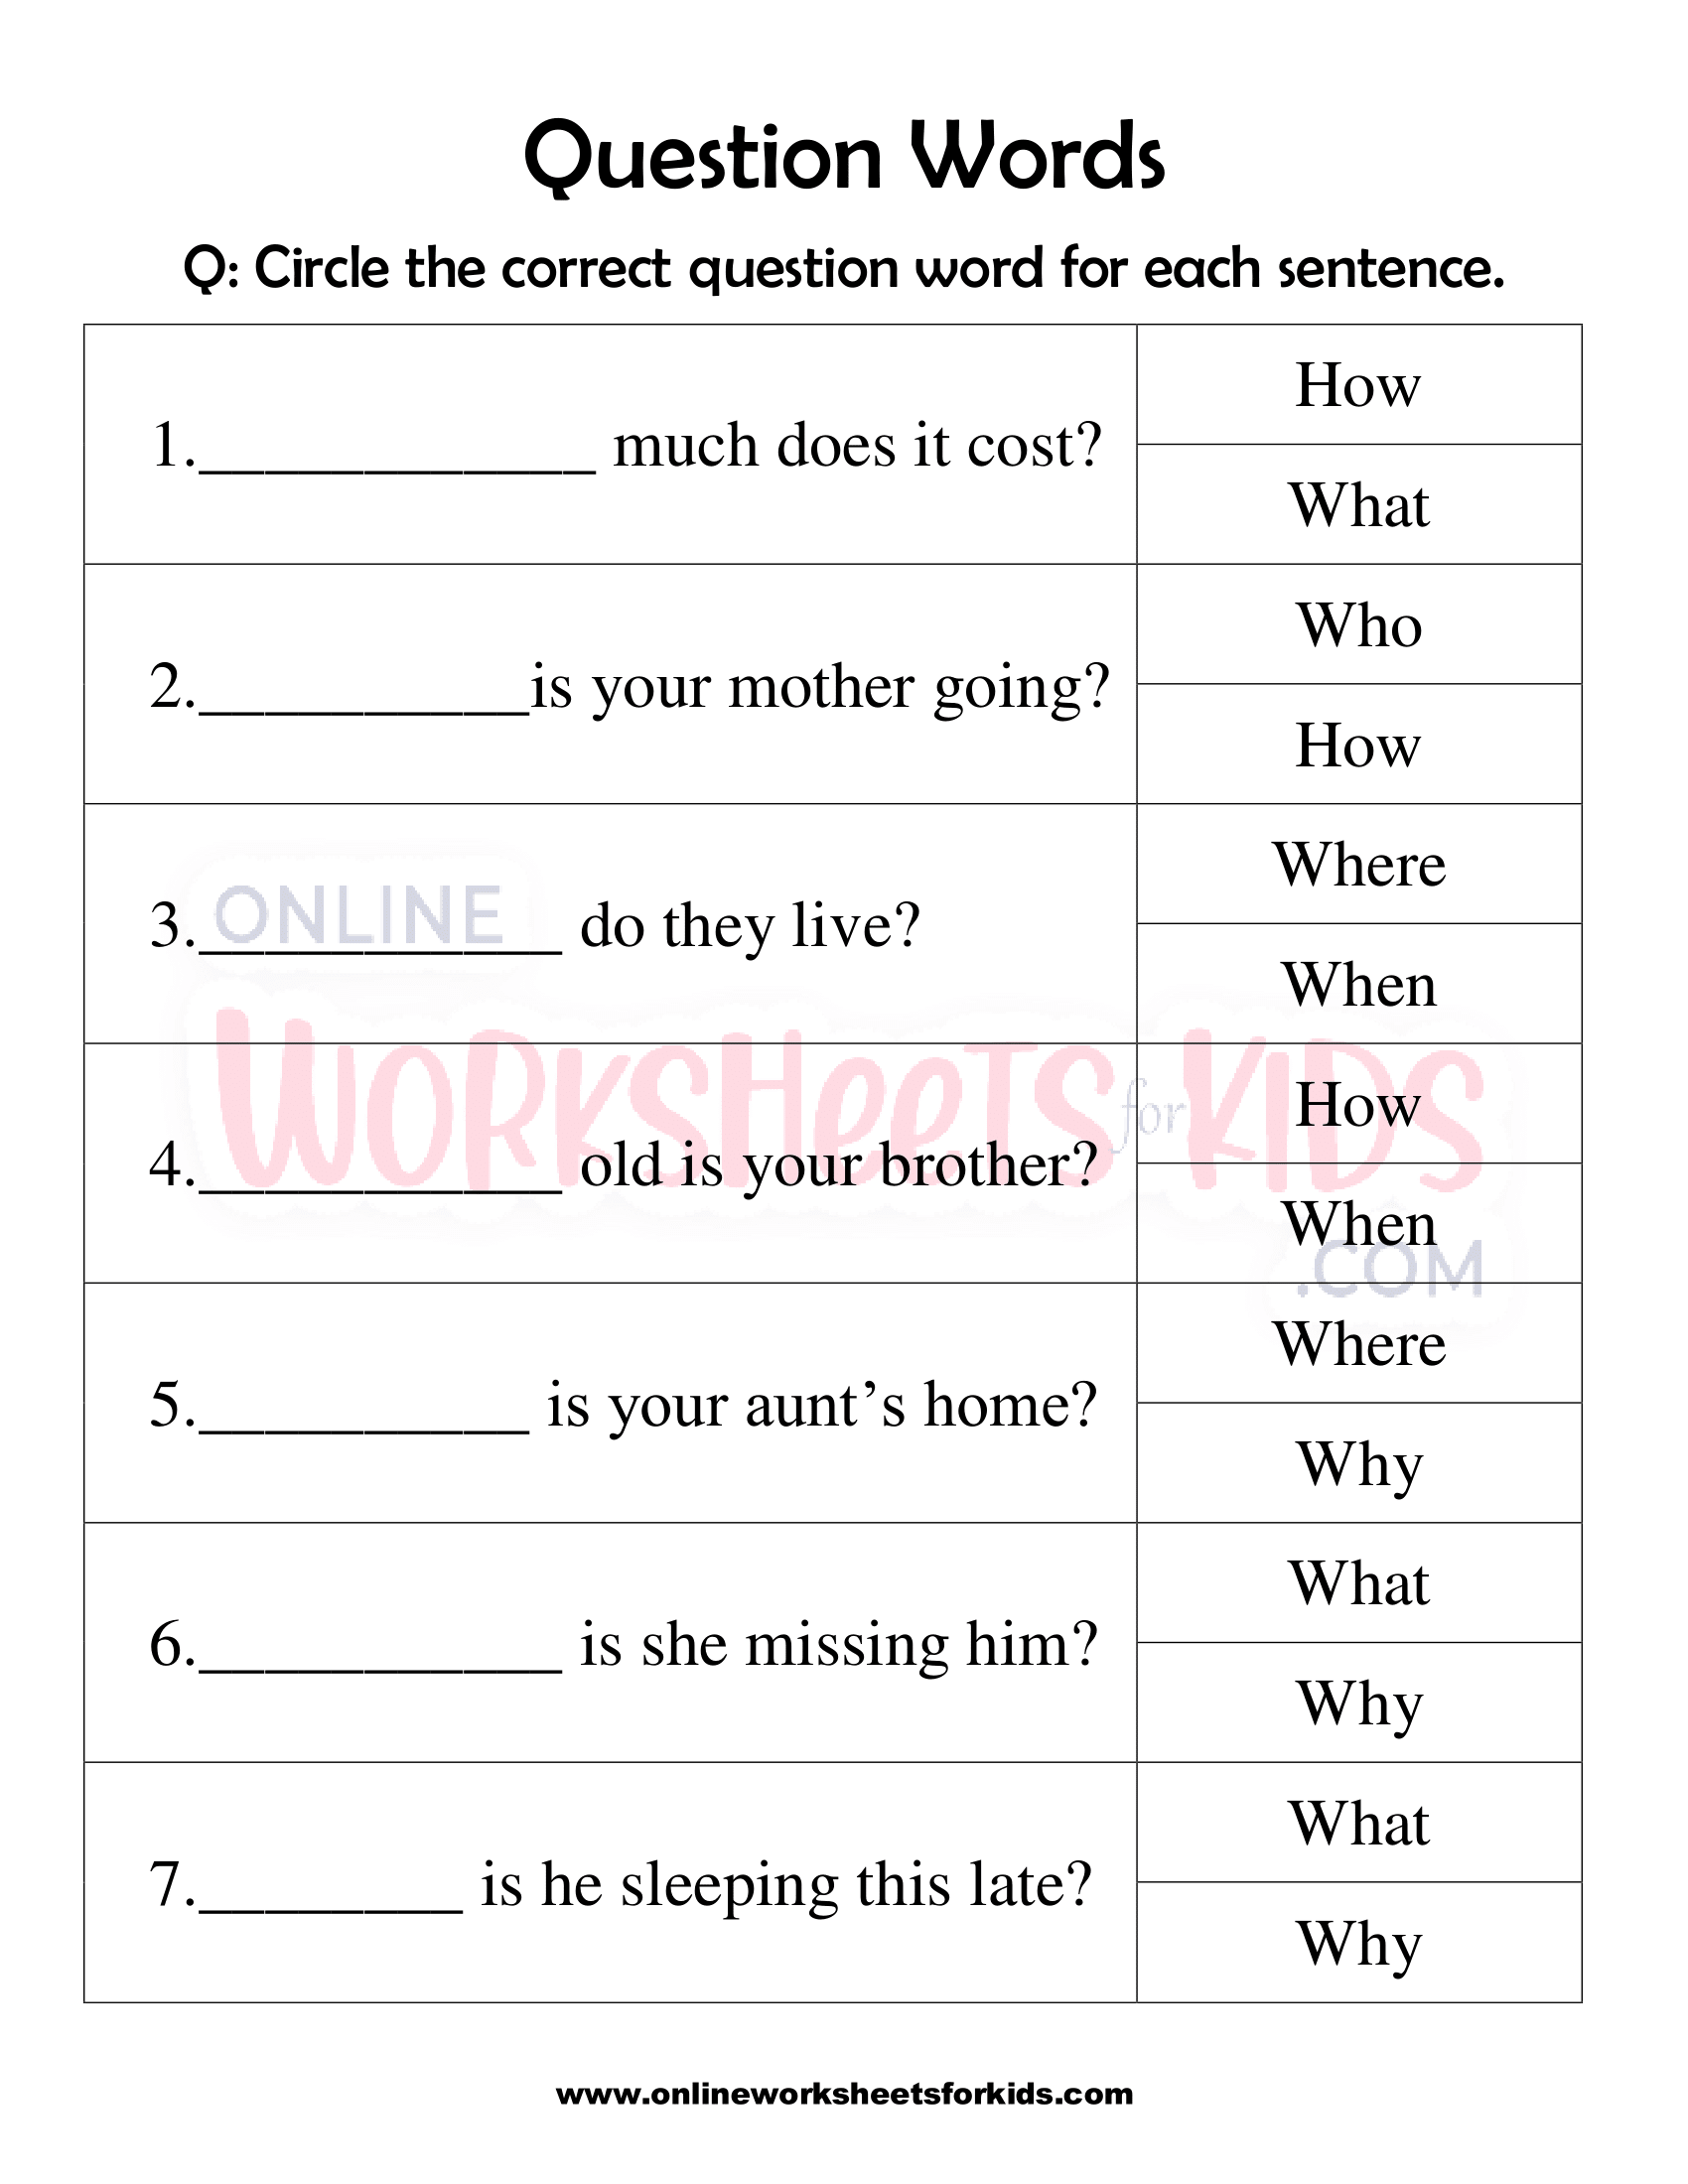 question-word-worksheet-for-grade-1-7